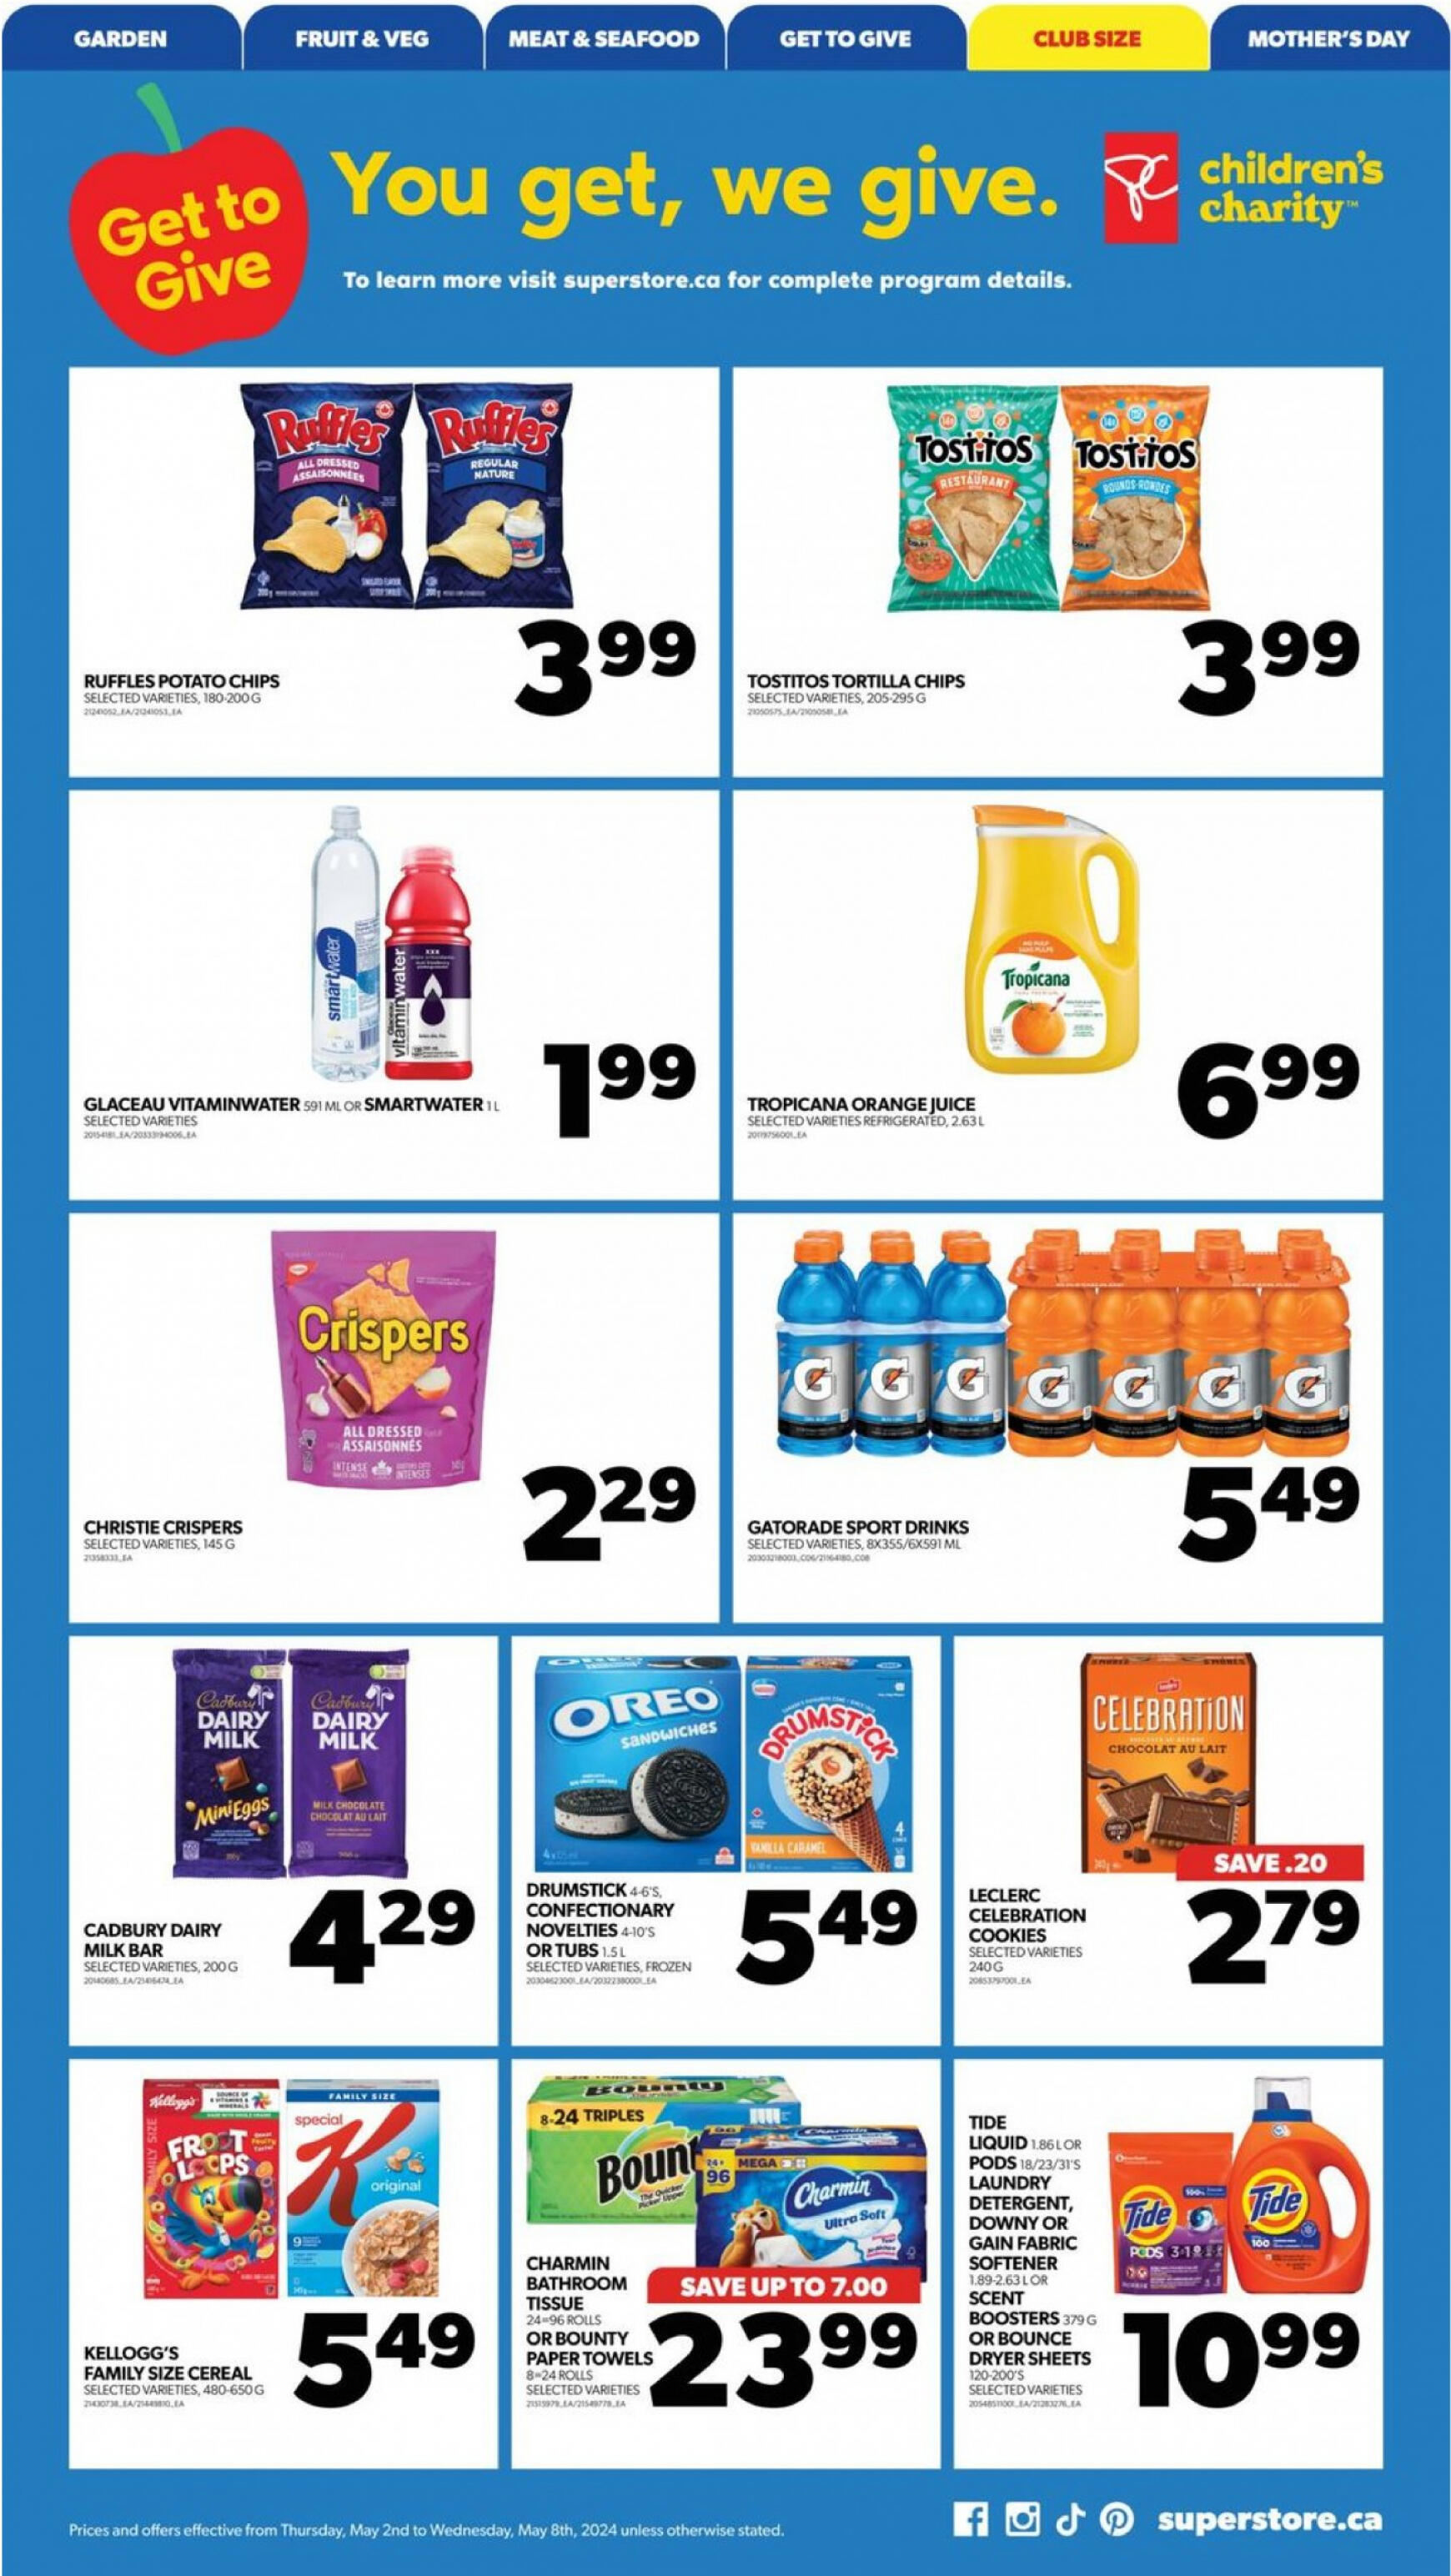 real-canadian-superstore - Real Canadian Superstore flyer current 02.05. - 08.05. - page: 14